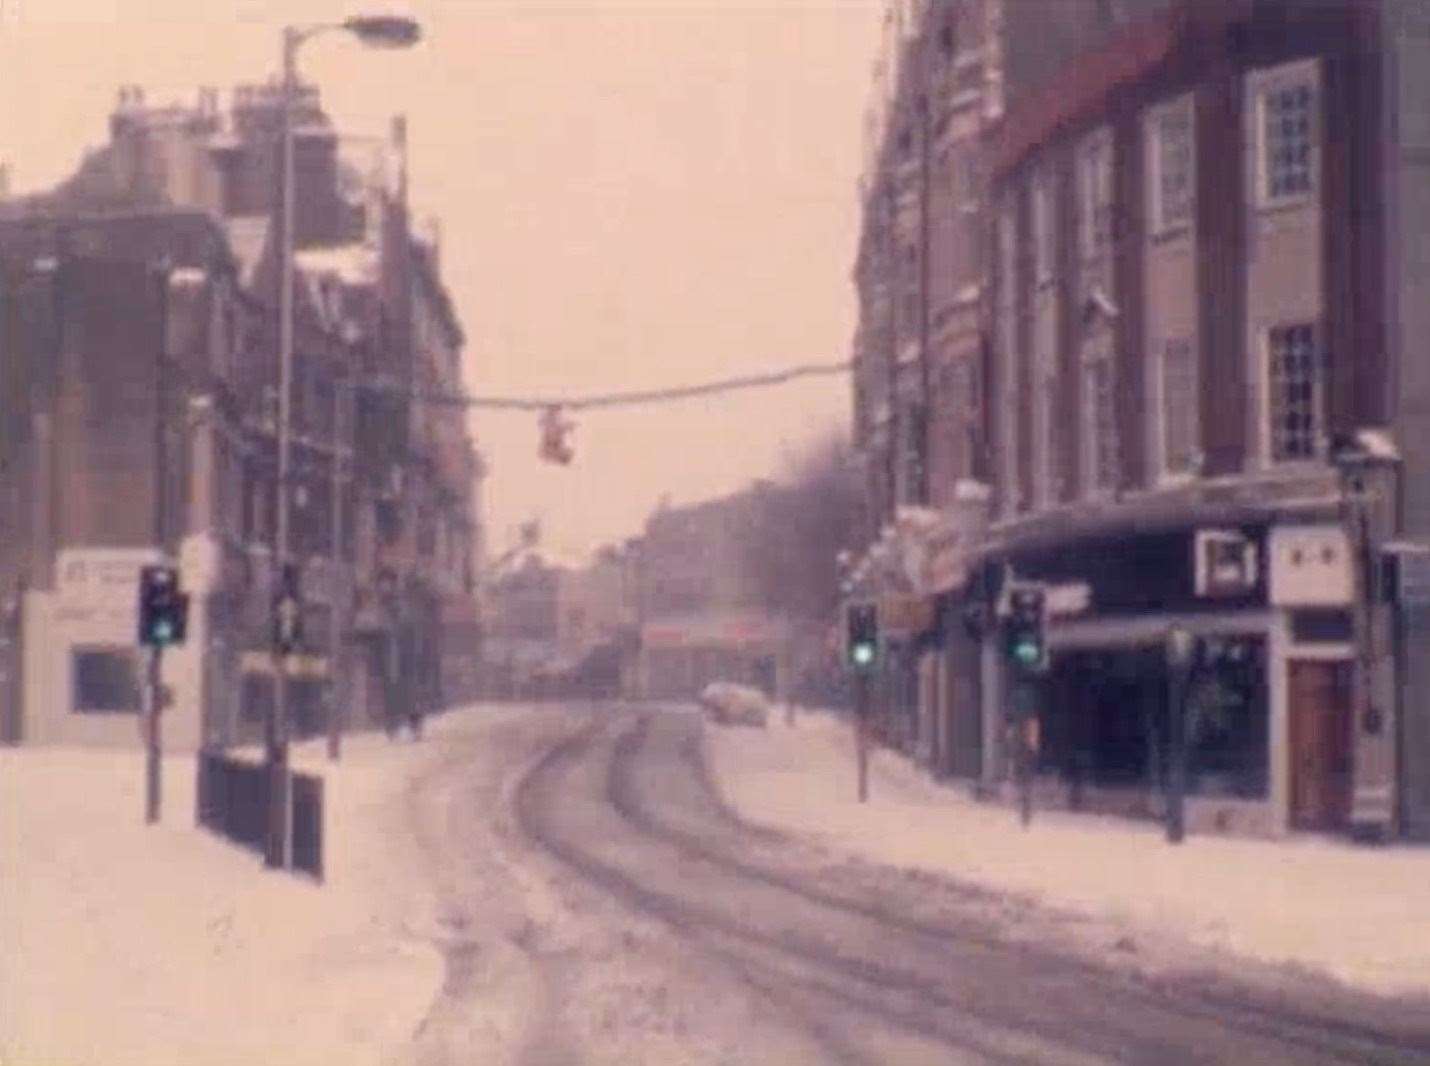 Winter wilderness. The frozen scene at Cannon Street at the start of 1979. Picture: Dover Museum